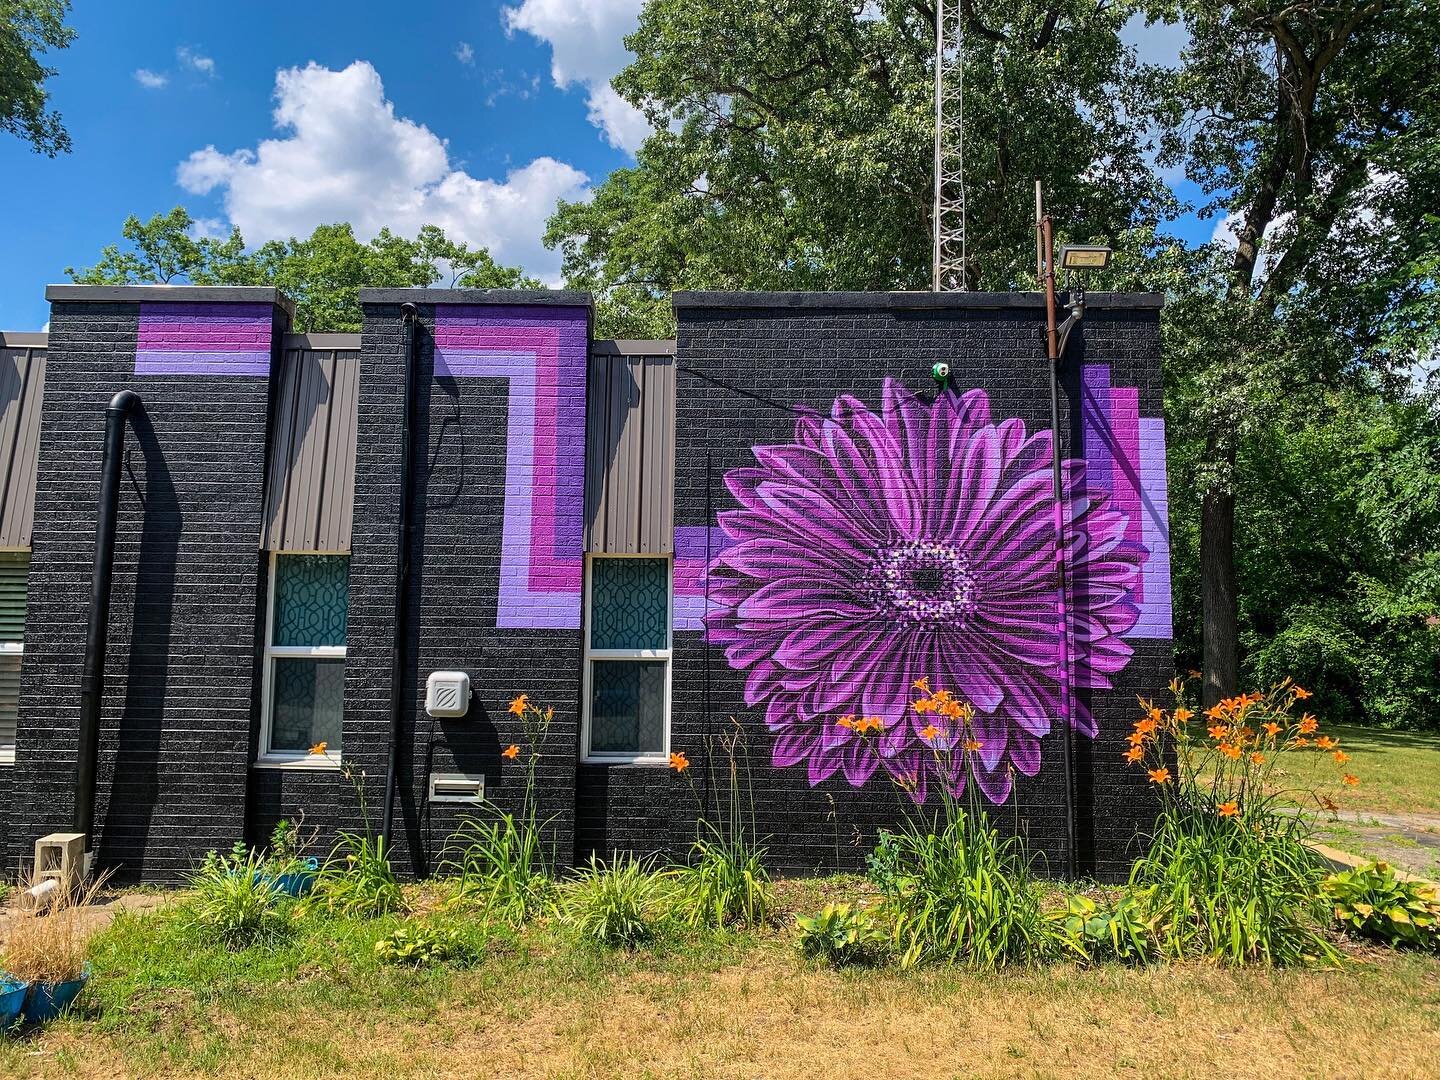 Final photo of this majestic purple daisy for Reflections Counseling. Located in the back of the building, in front of their garden 🪴🍃 

Therapy has definitely helped me, especially in the past year, so I was so happy to help brighten up this build